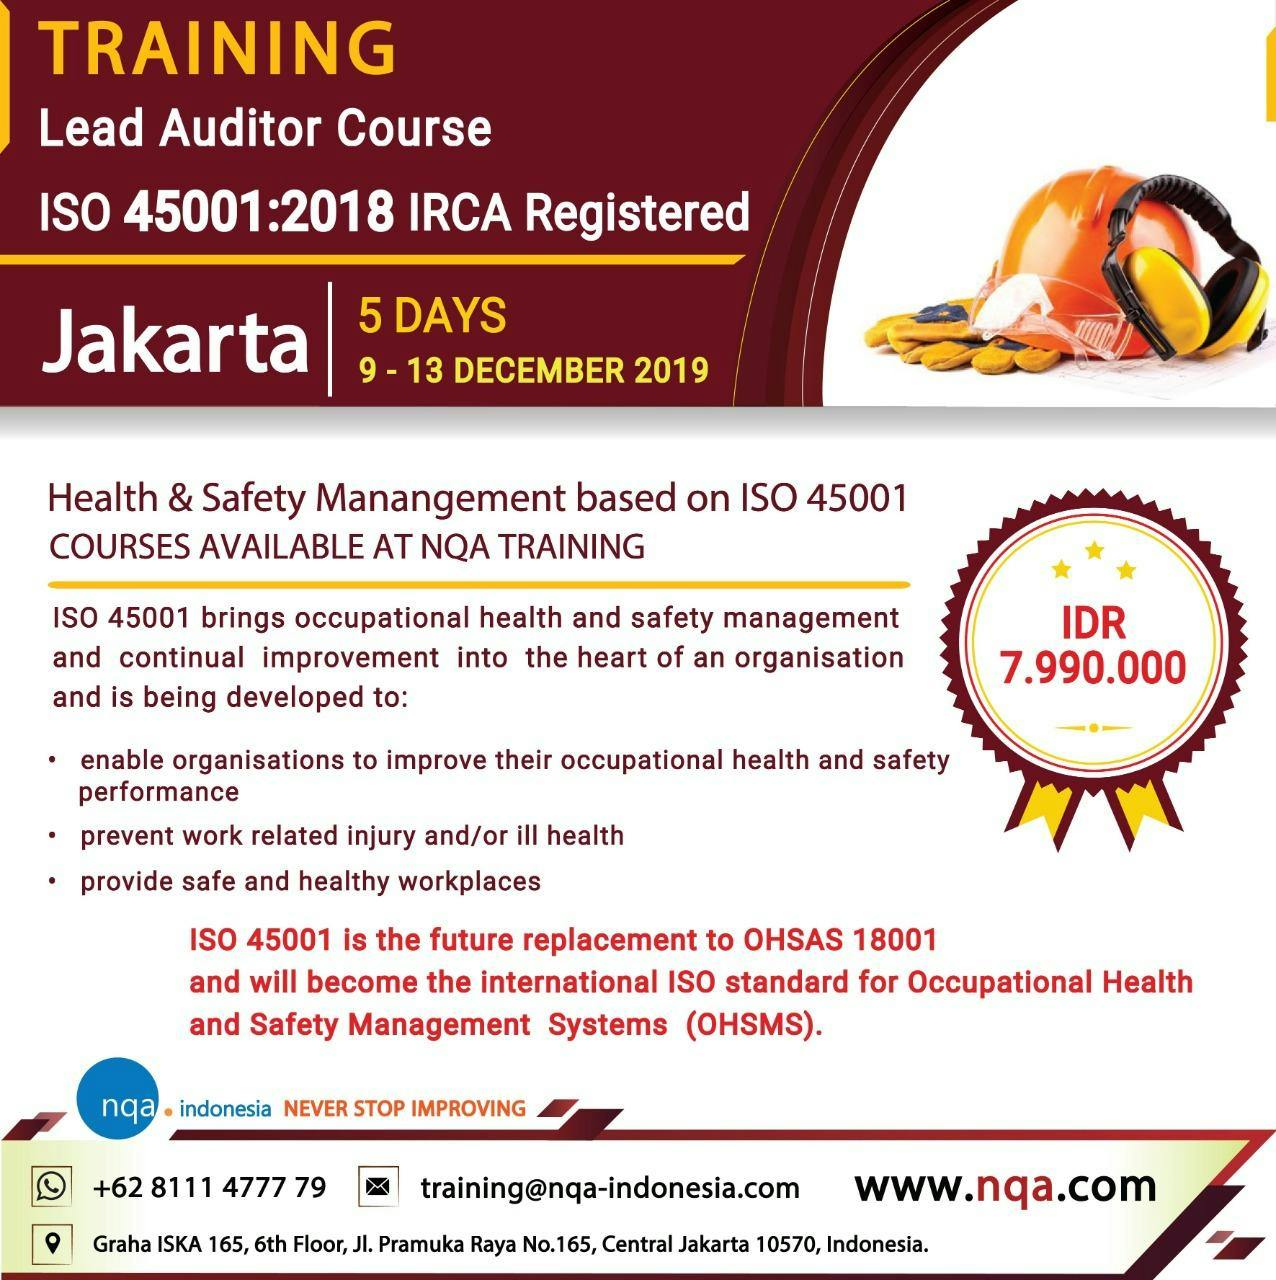 Lead Auditor Course ISO 45001:2018 - IRCA Registered - IDR 7.990.000,-